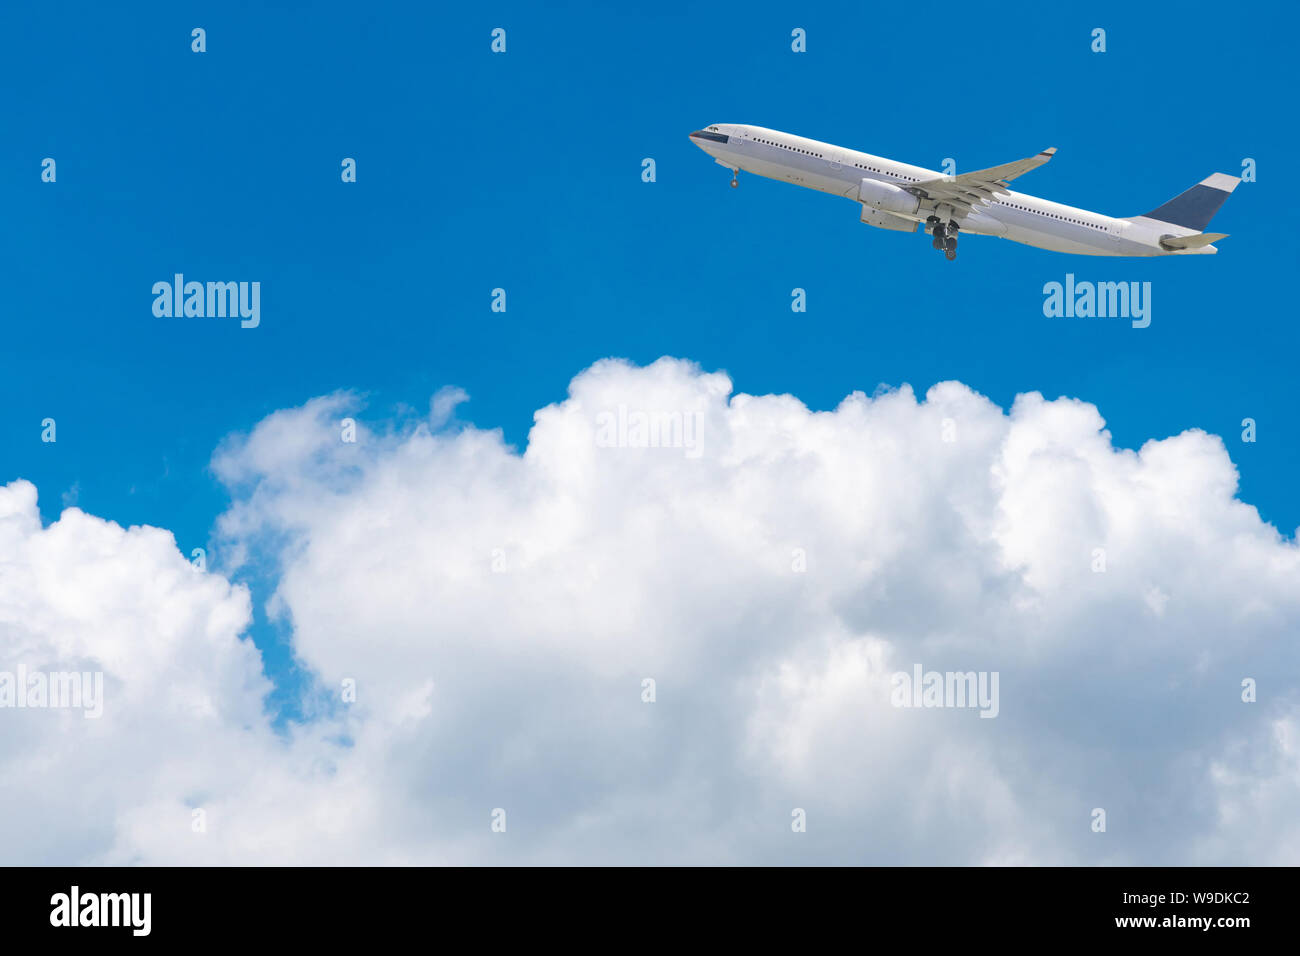 Commercial airplane flying over bright blue sky and white clouds. Elegant Design with copy space for travel concept. Stock Photo